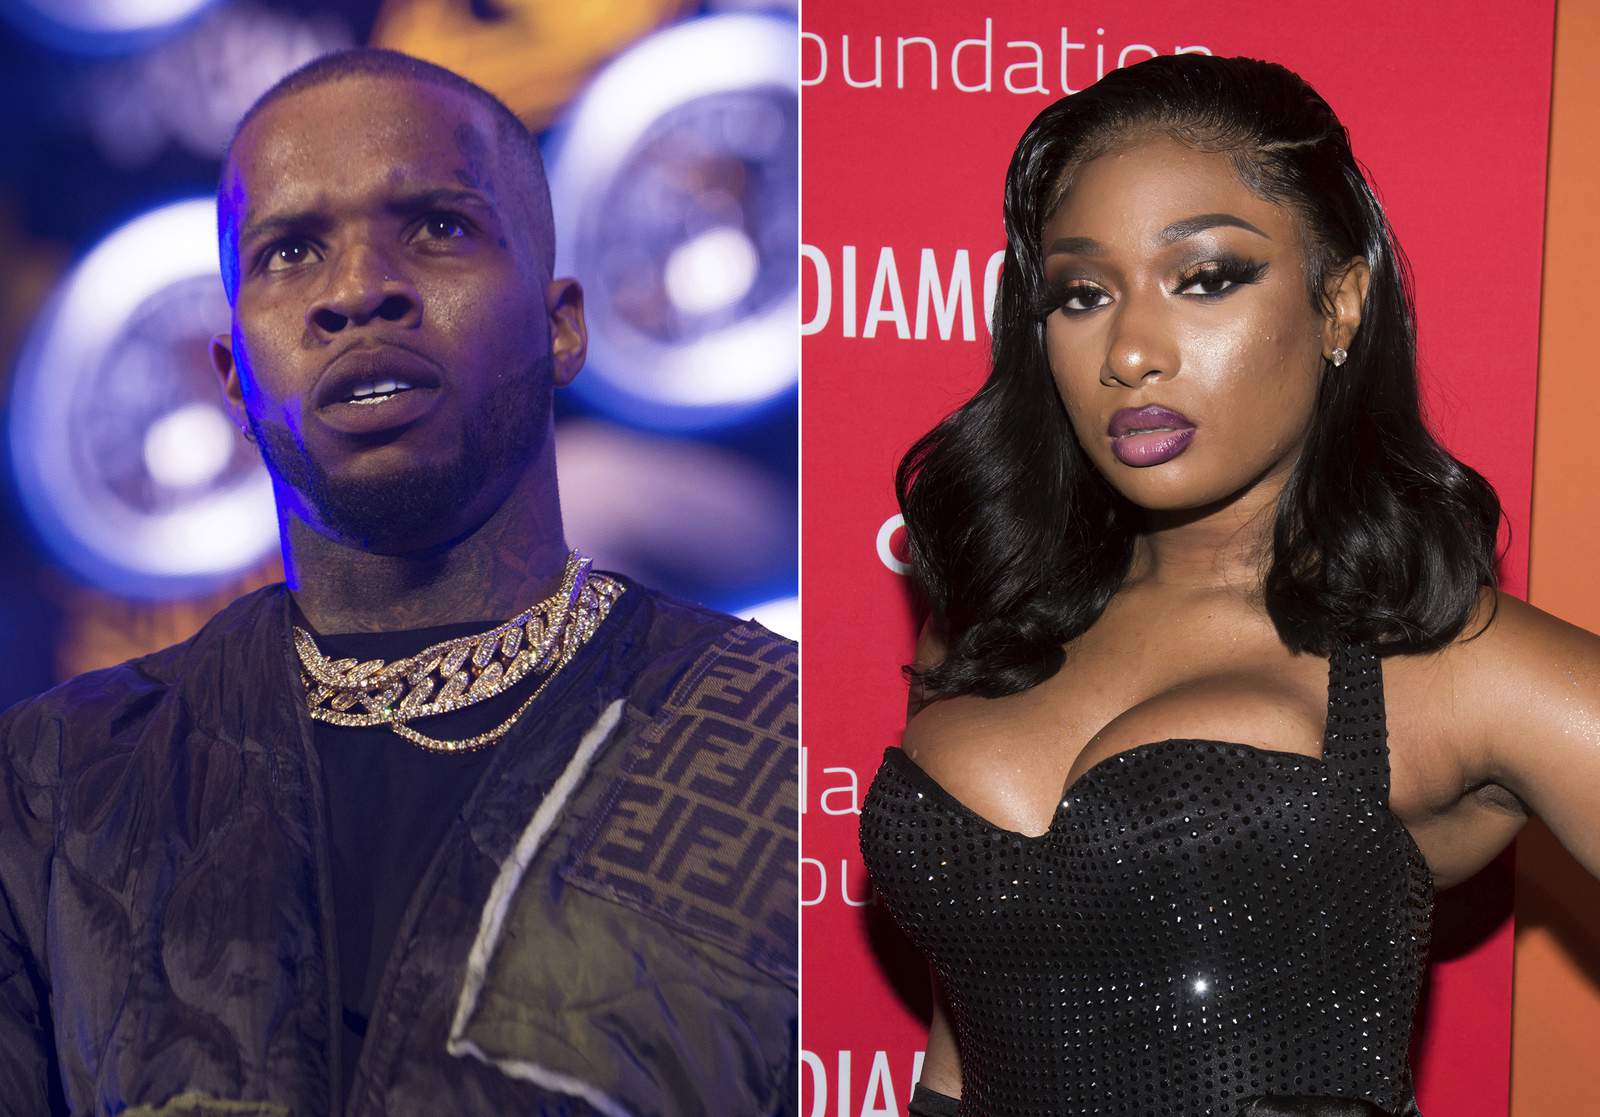 Megan Thee Stallion op-ed calls for protecting Black women